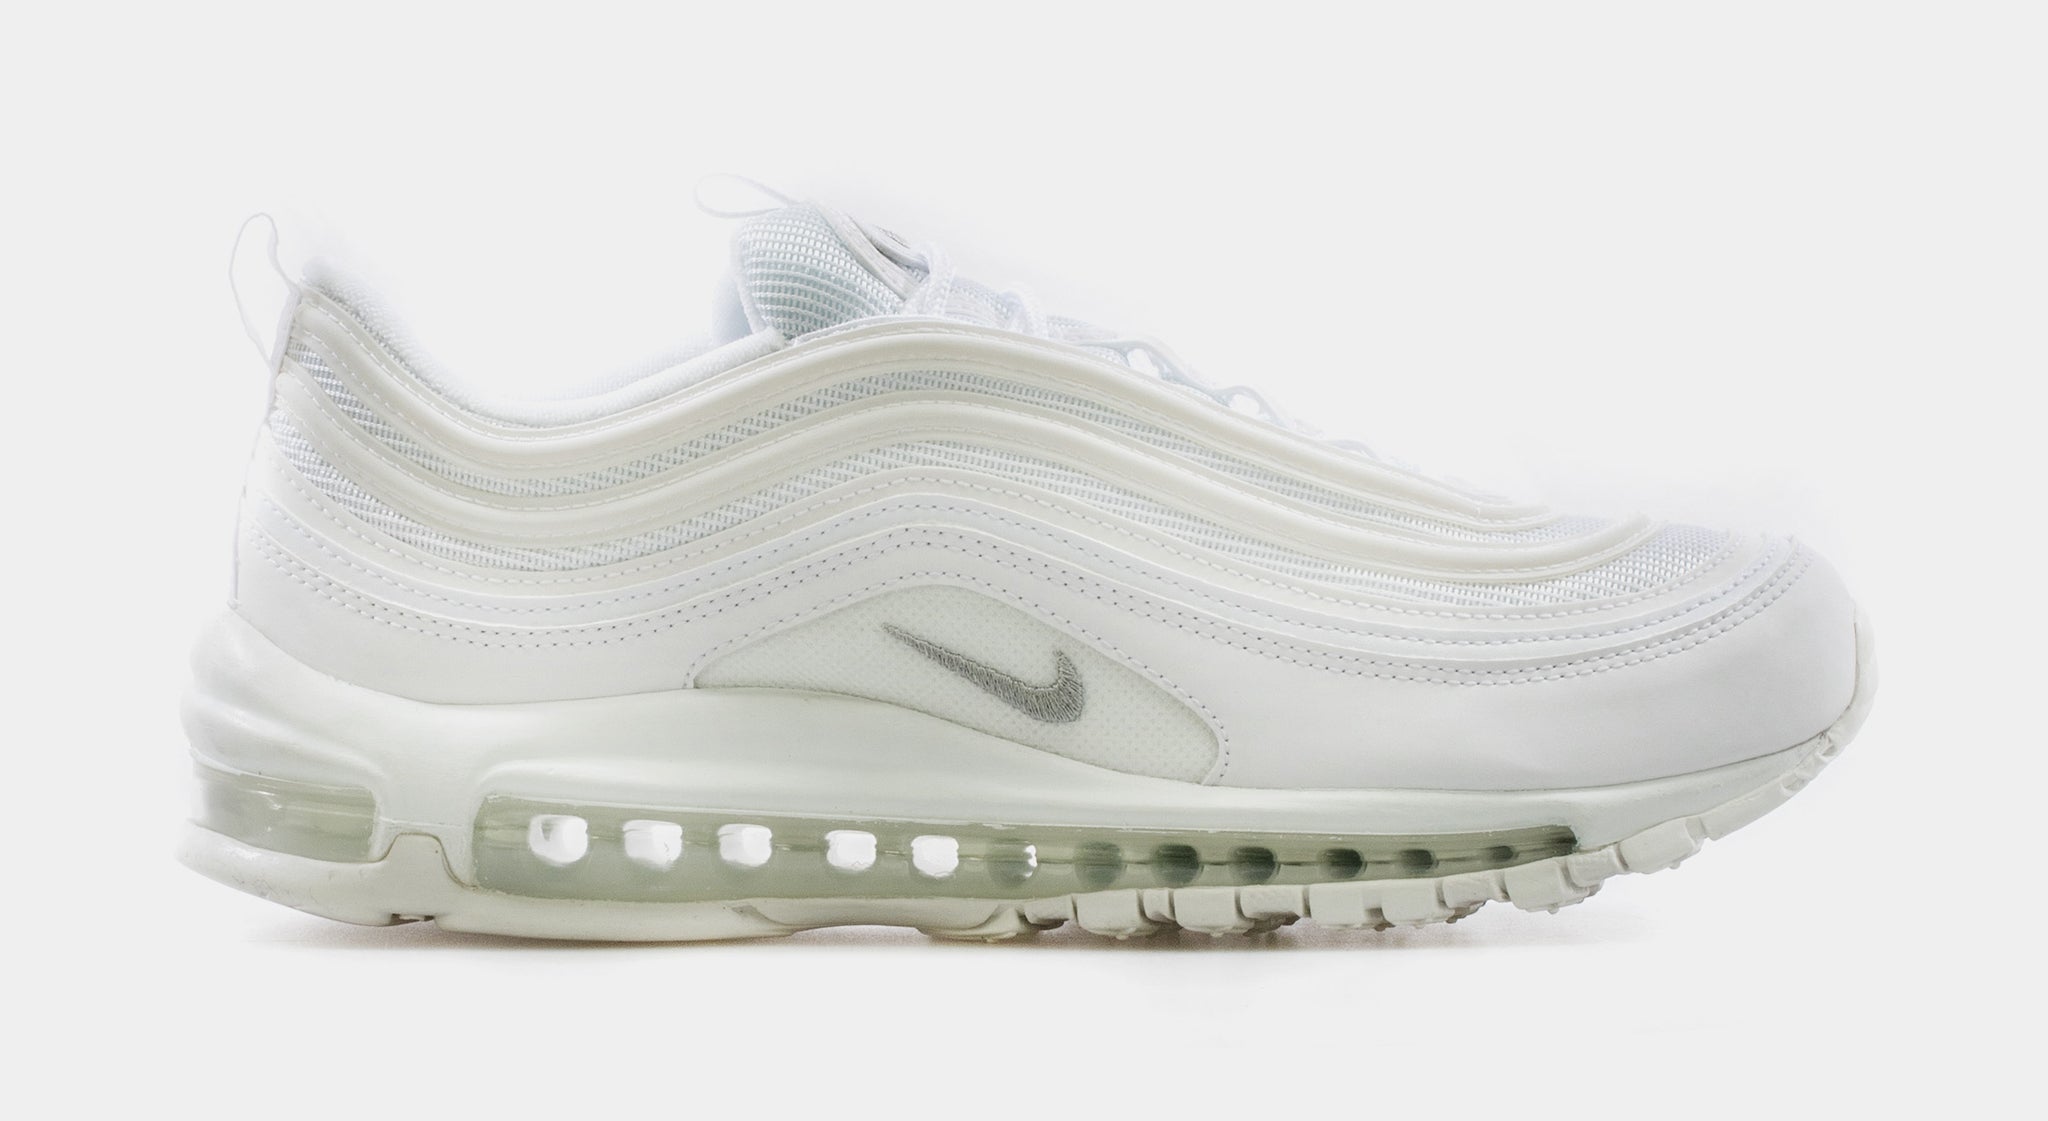 Nike Men's Air Max 97 Shoes in White, Size: 6.5 | 921826-101